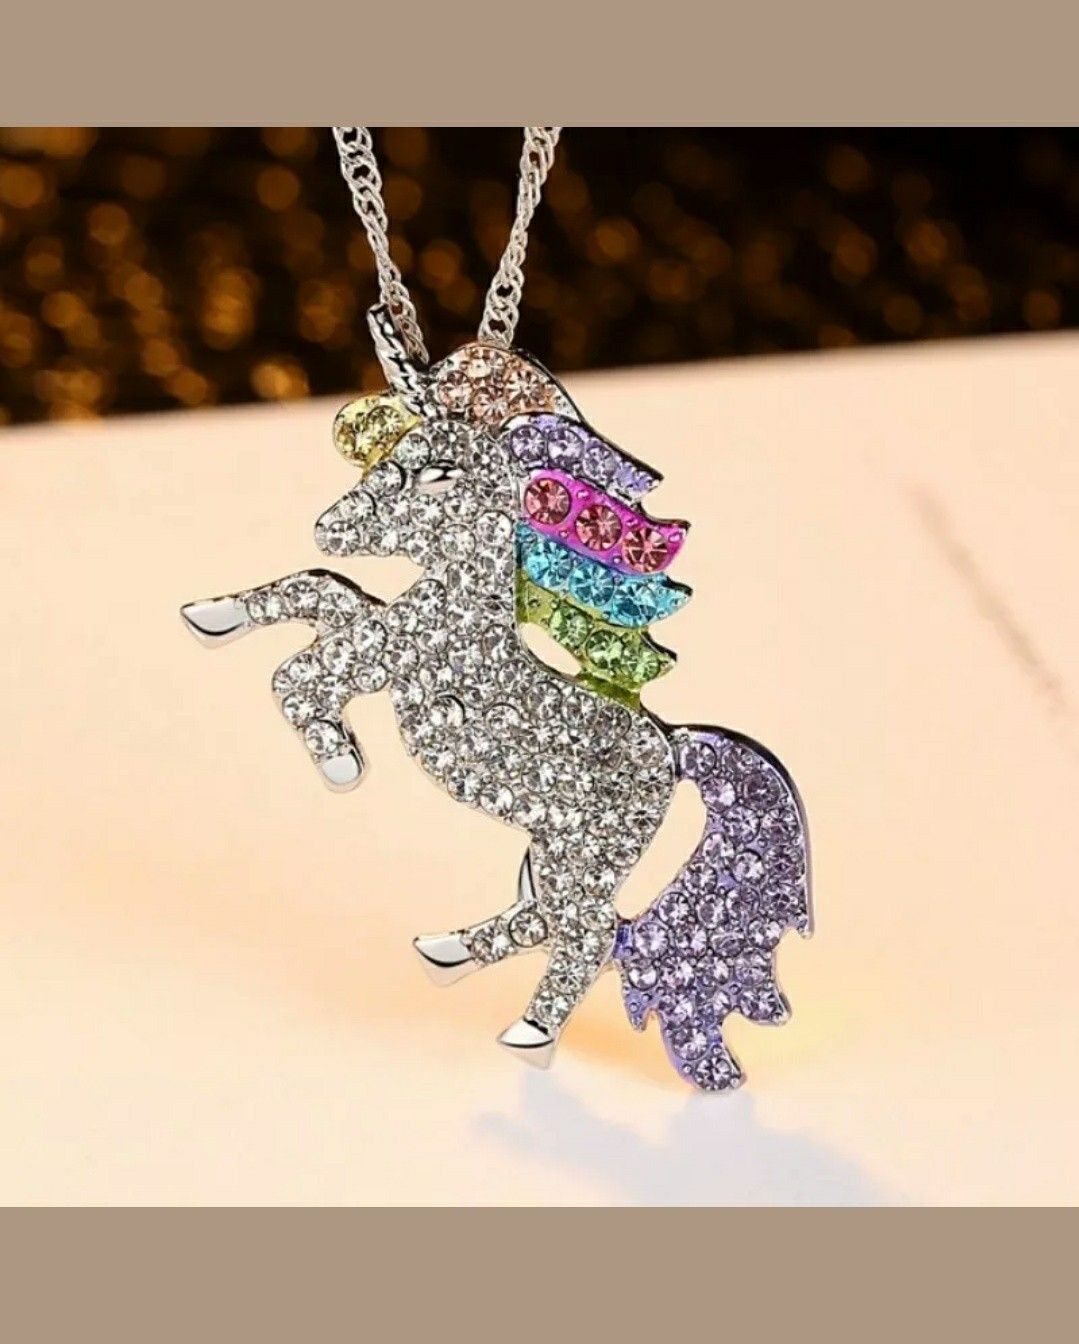 Girl's Unicorn Sparkle Necklace, with Twisted link Chain. New.